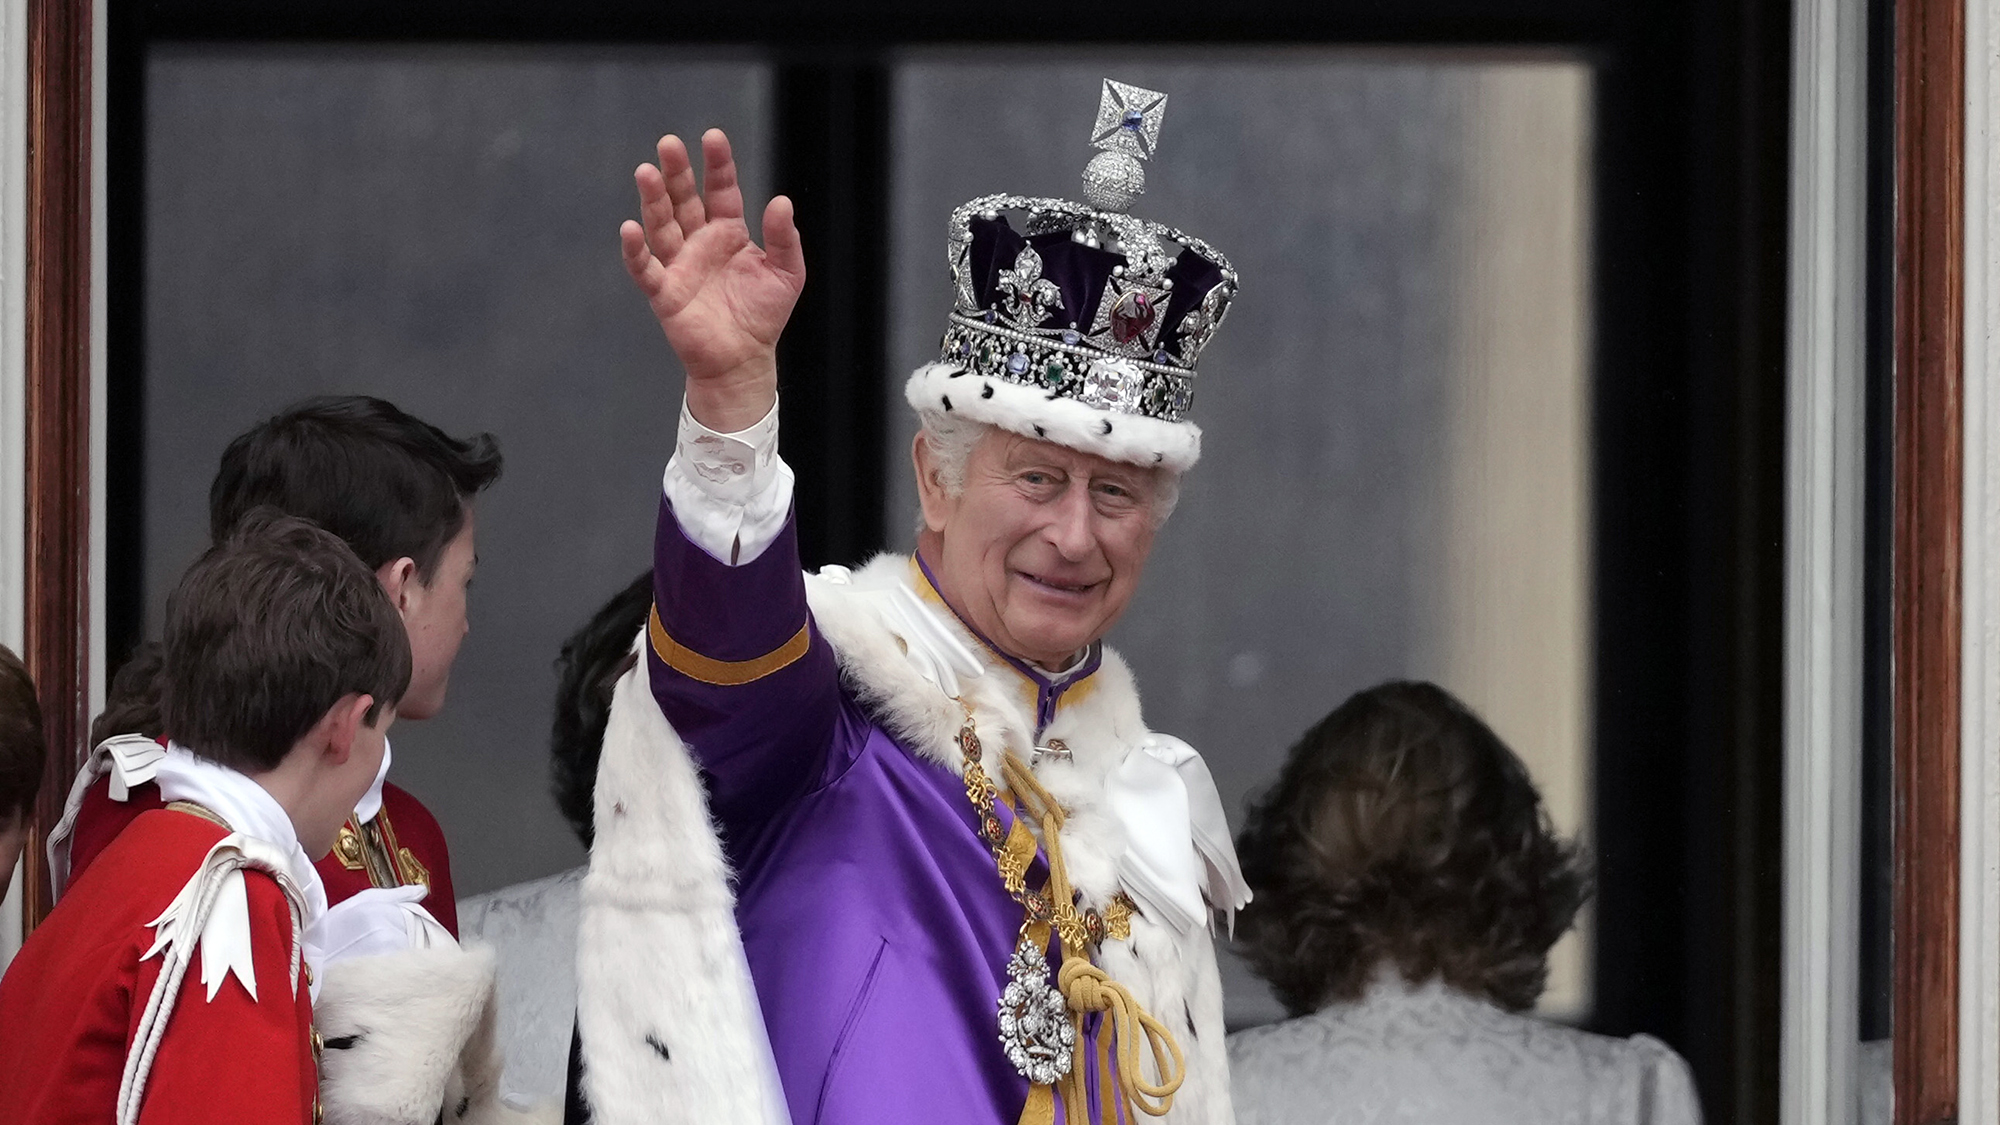 King Charles III facts: Monarch's age, wife, children, net worth and more  revealed - Smooth